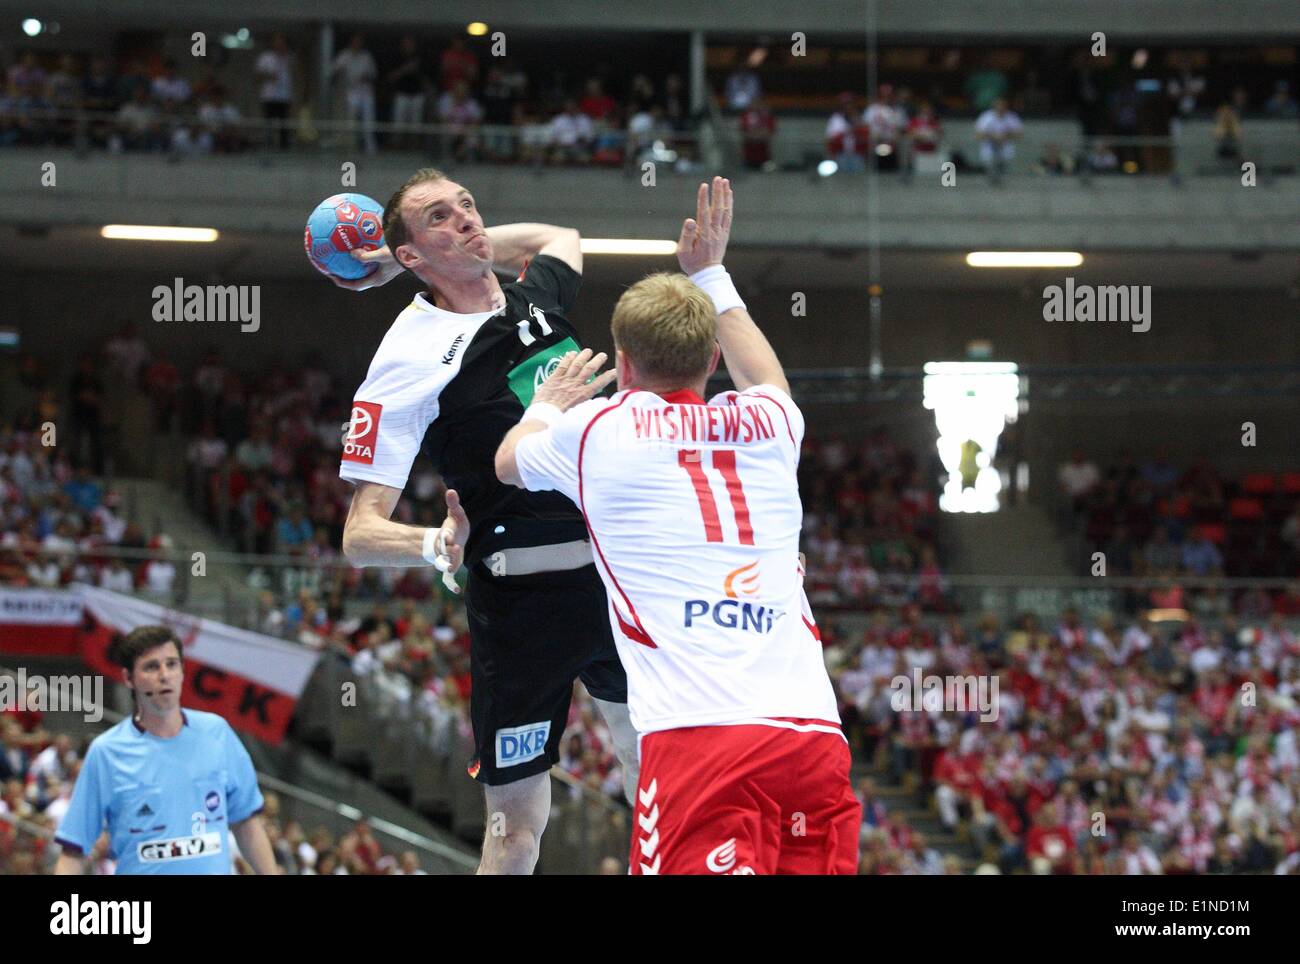 Gdansk, Poland 7th, June 2014 Quatar 2015 Men's World Handball Championship Play Off game between Poland and Germany at ERGO Arena sports hall. Holger Glandorf (11 black) in action during the game. Credit:  Michal Fludra/Alamy Live News Stock Photo